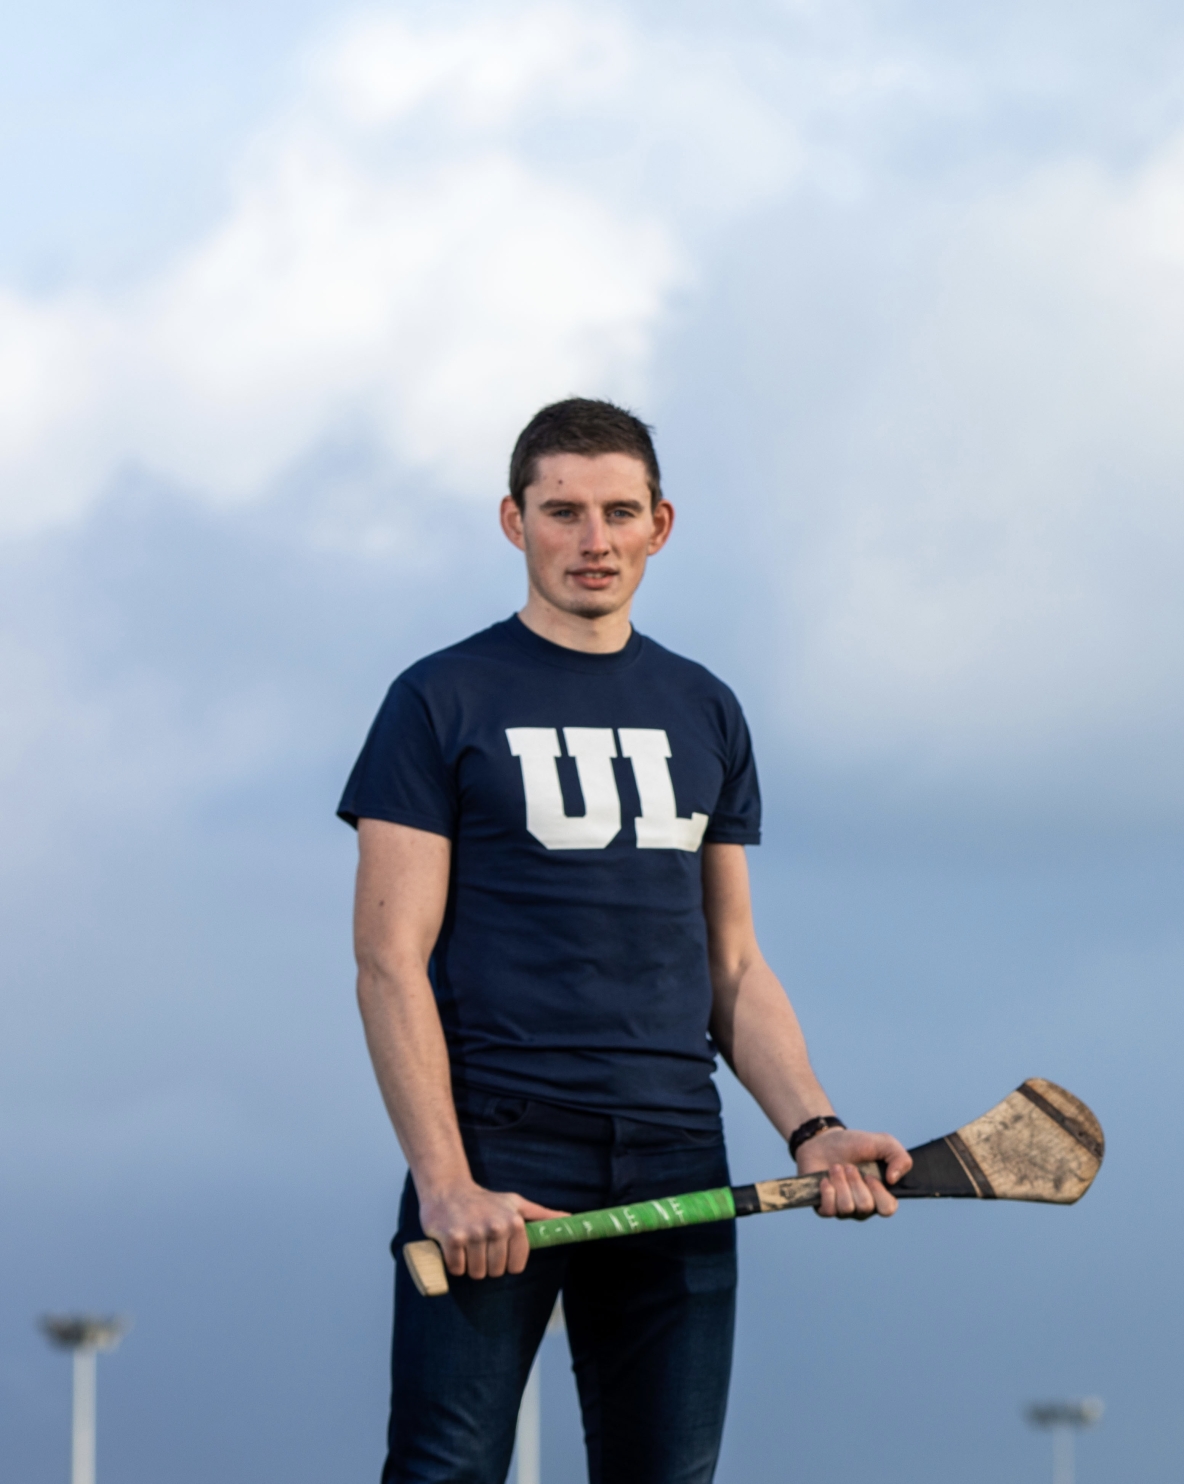 Gearoid Hegarty in a navy t-shirt with UL in white on the front.  He is holding a hurley in both hands and looking directly at the camera with clear sky behind him.